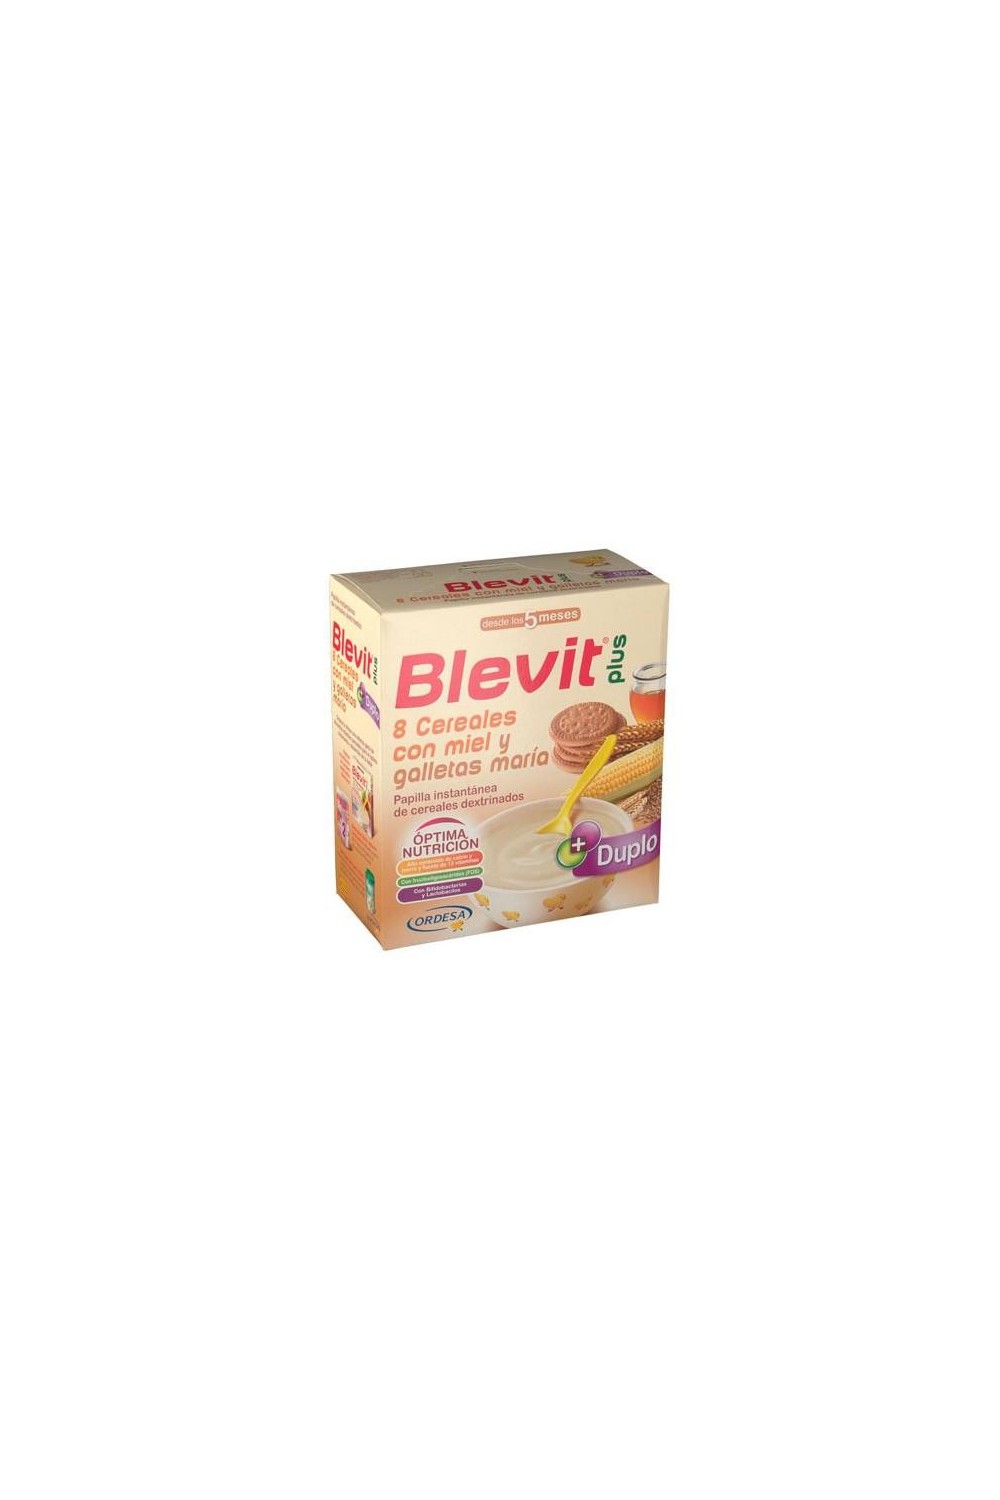 Ordesa Blevit™ Plus 8 Cereals With Honey and Biscuit Maróa 600g